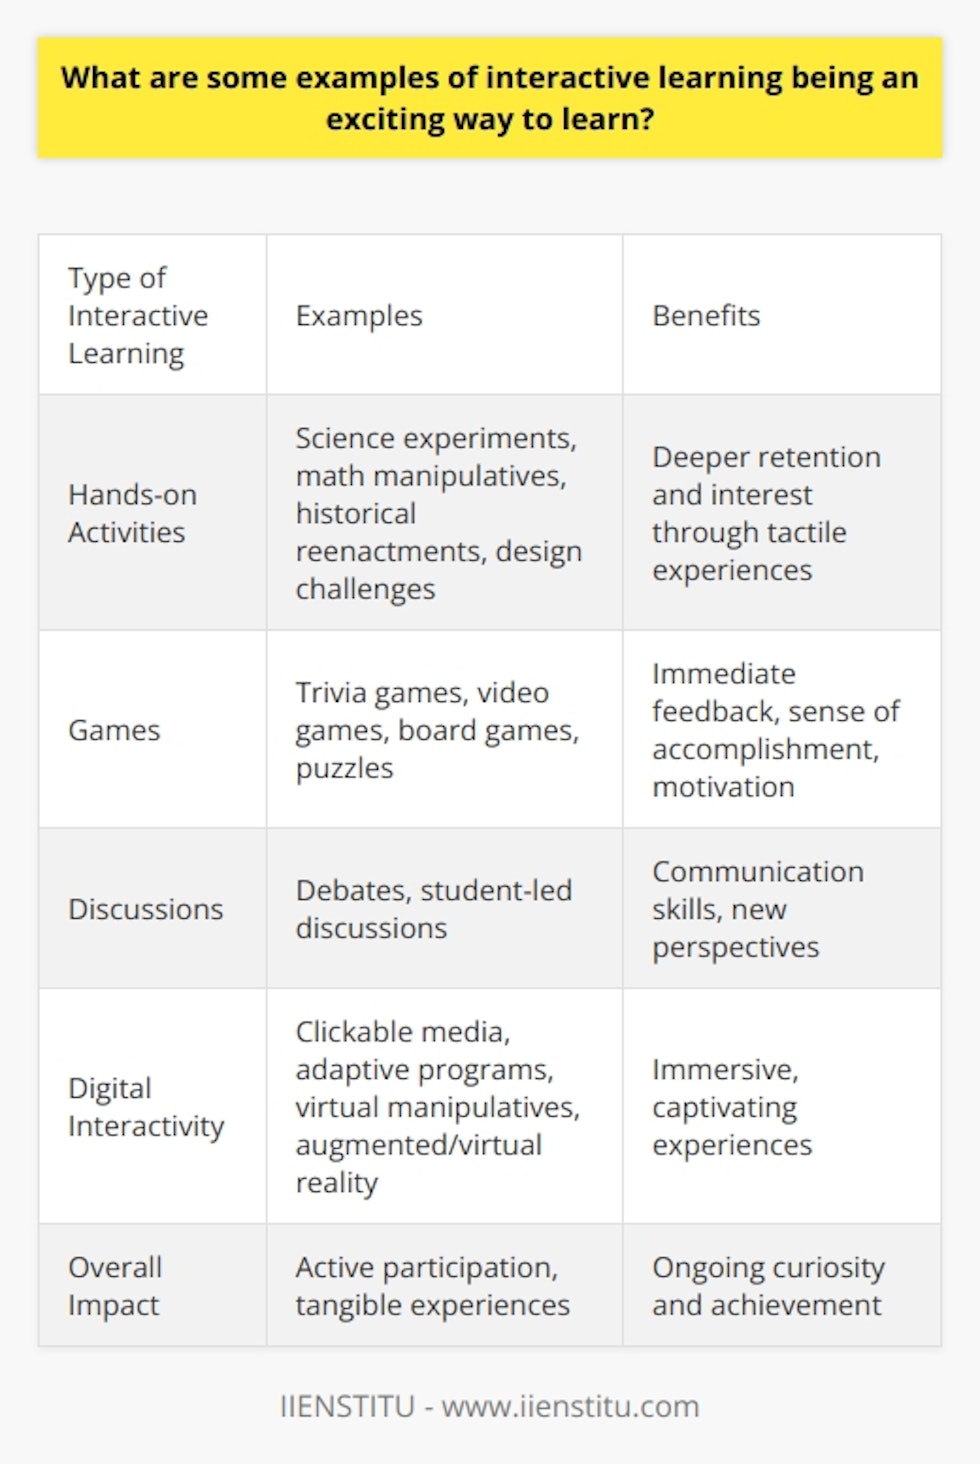 Here is some detailed content on examples of interactive learning being an exciting way to learn:Interactive learning provides an exciting and engaging approach to education that actively involves students in the learning process. Several techniques help make interactive learning both dynamic and fun.Hands-on ActivitiesActivities that allow students to physically interact with concepts create an exciting learning environment. Science experiments where students mix chemicals and observe reactions bring science principles to life. Math manipulatives like blocks, 3D shapes, and measuring tools make abstract concepts concrete. Historical reenactments through roleplay immerse students in pivotal events. Design challenges teach critical thinking and problem solving. Tactile activities like these facilitate deeper retention and interest.GamesGames introduce fun competition and incentivize learning. Trivia games like Kahoot enable students to review materials and test knowledge. Kinesthetic video games get students up and moving while reinforcing concepts. Board games that simulate real-world systems provide experiential learning. Puzzles encourage critical analysis. Games give immediate feedback and a sense of accomplishment, motivating continued engagement.DiscussionsDiscussing material with peers requires verbalizing and defending ideas. Hearing others' perspectives introduces new ways of thinking. Debates incentivize research and reasoned arguments. Student-led discussions empower learners to take charge of their education. Social dynamics make discussions exciting. They also build critical communication abilities.Digital Interactivity Interactive technology immerses students in material. Clickable images, videos, and animations provide dynamic engagement. Adaptive programs adjust to students' levels and needs for personalized learning. Virtual manipulatives make intangible concepts tactile. Web quests take students on guided adventures. Augmented and virtual reality create immersive experiences that captivate students' imaginations and intellects.With interactive learning, students are active participants rather than passive observers. These techniques spark excitement and passion for learning through experience. Their tangible, participatory nature sticks with students long after the lesson ends, inspiring ongoing curiosity and achievement.